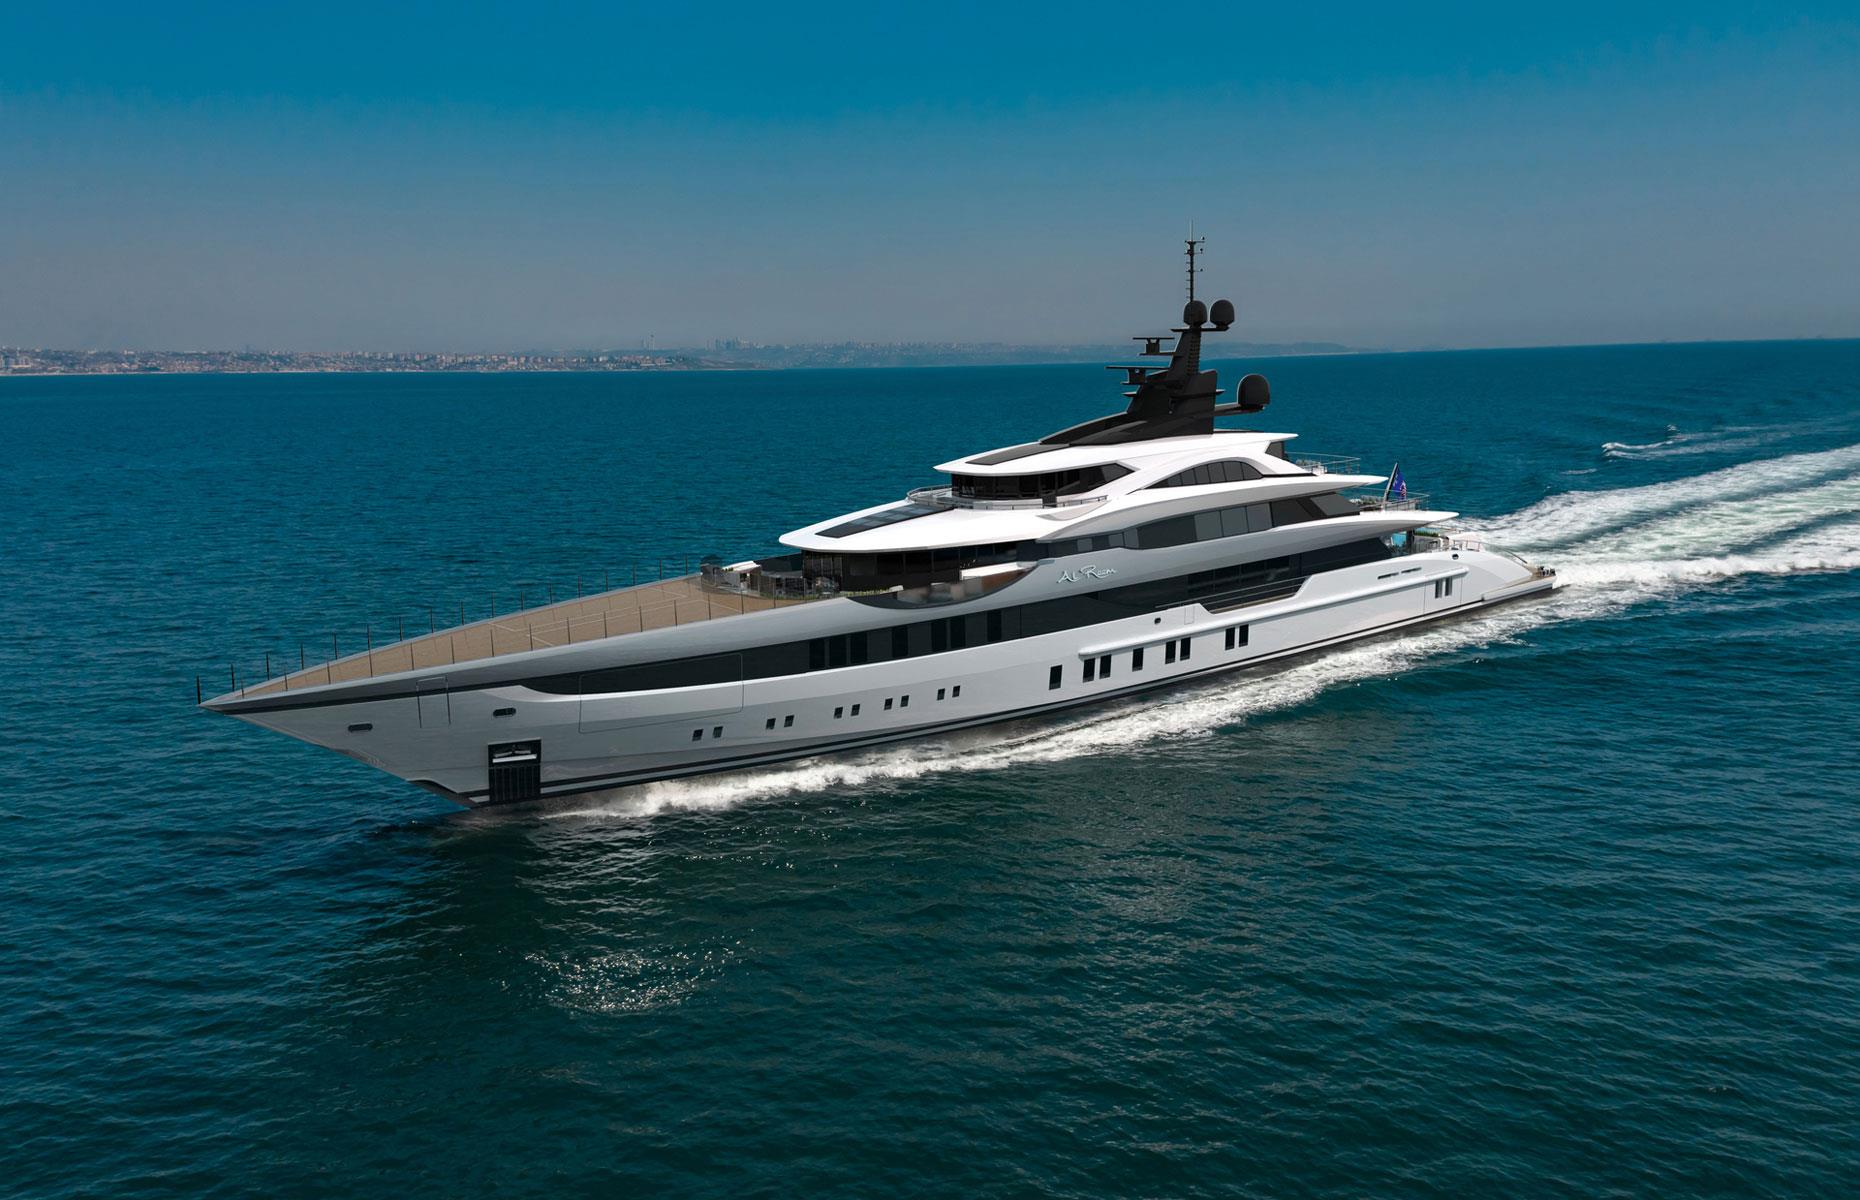 <p>Formally known as<em> Silence</em>, <em>Al Reem</em> is getting its finishing touches at the Bilgin shipyard in Türkiye's capital, Istanbul.</p>  <p>Spanning 263 feet (80m), the superyacht showcases Bilgin's signature style – think razor-sharp exterior lines and a super-slender profile – with naval architecture by Turkish studio Unique Yacht Design. It's the third unit of Bilgin's 263 Series and the most advanced of the trio.</p>